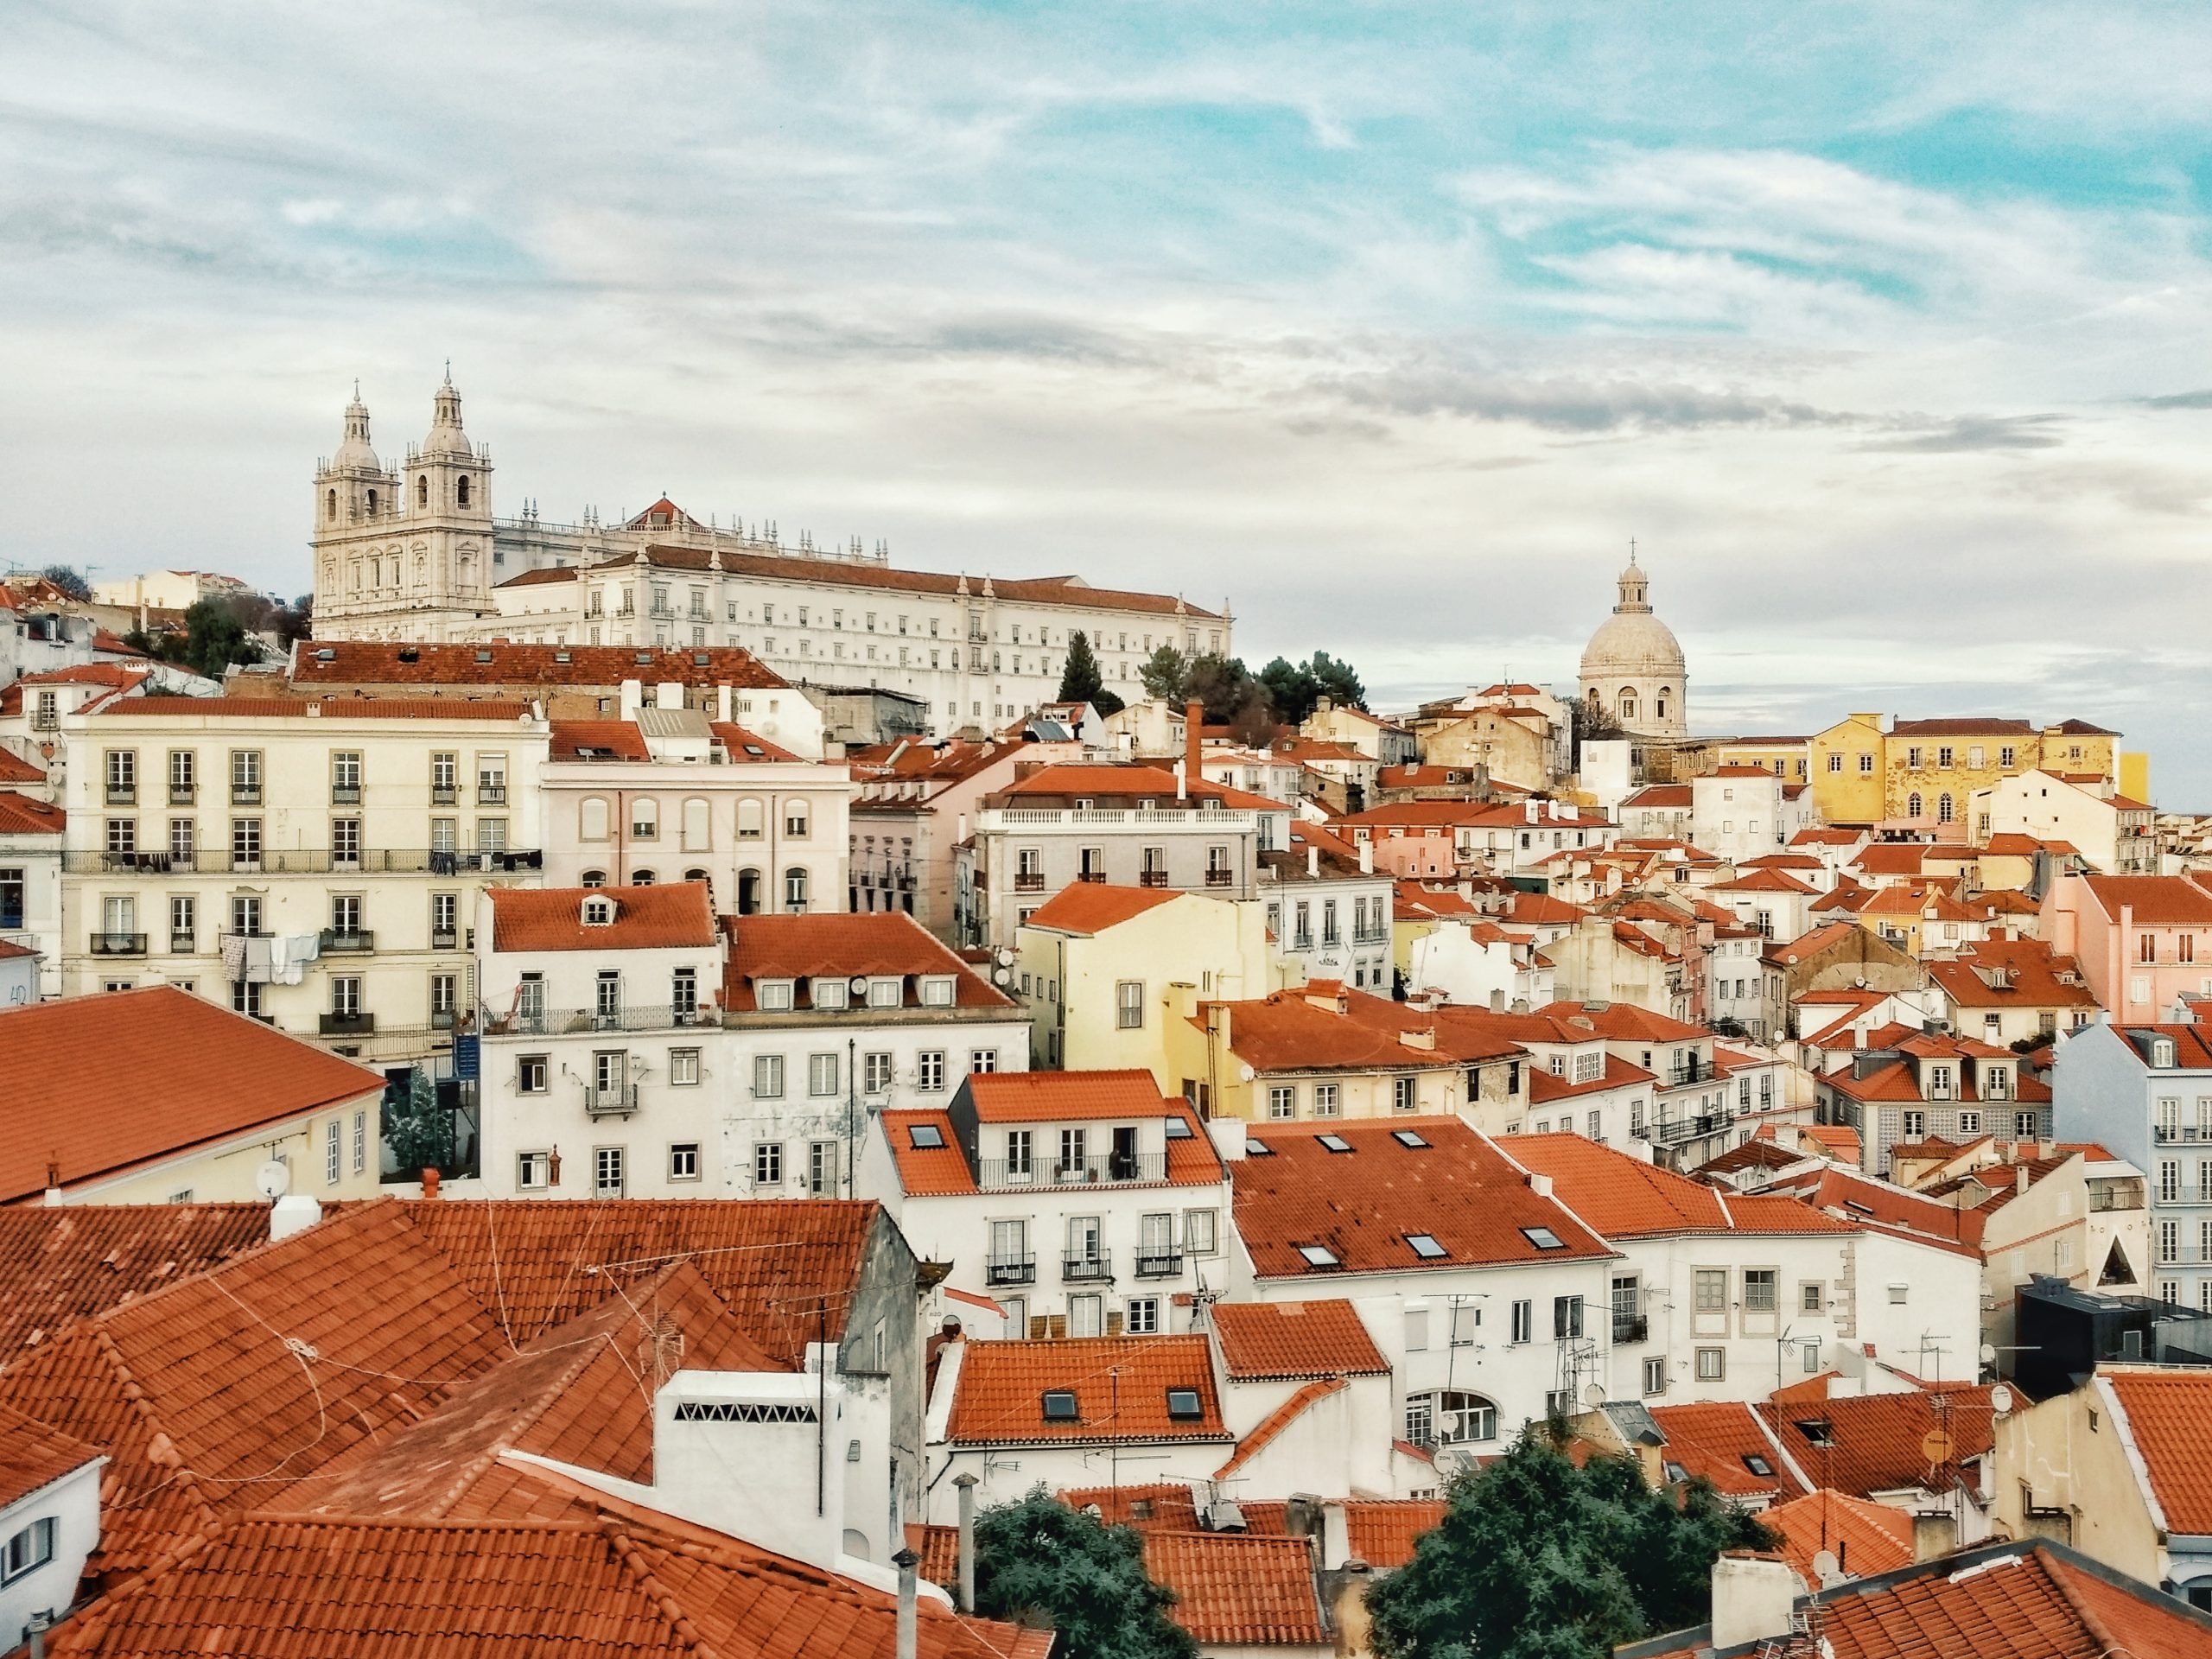 1-Week Portugal Itinerary: Where to Spend 7 Days in Portugal